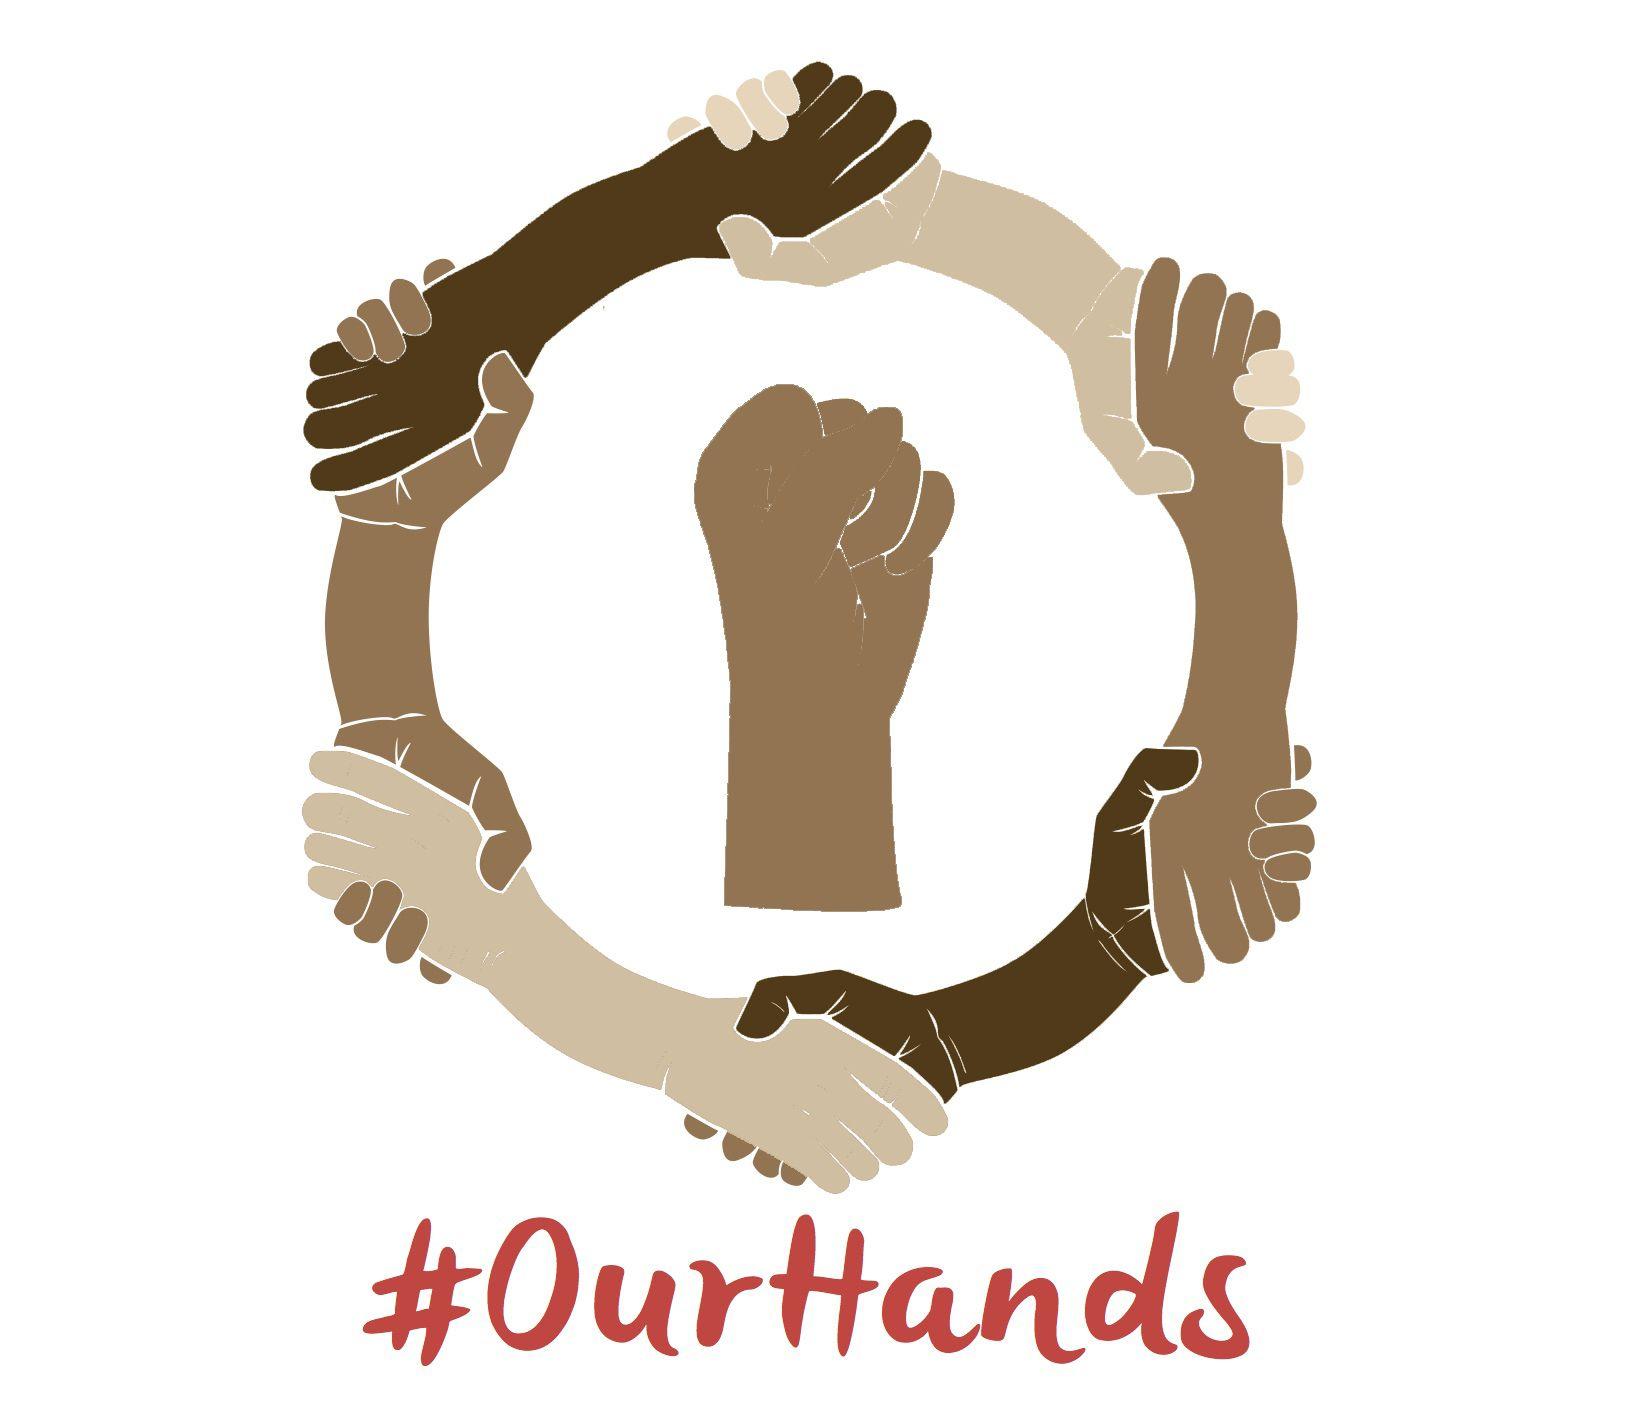 Worker Logo - Joining #OurHands for Domestic Worker Rights